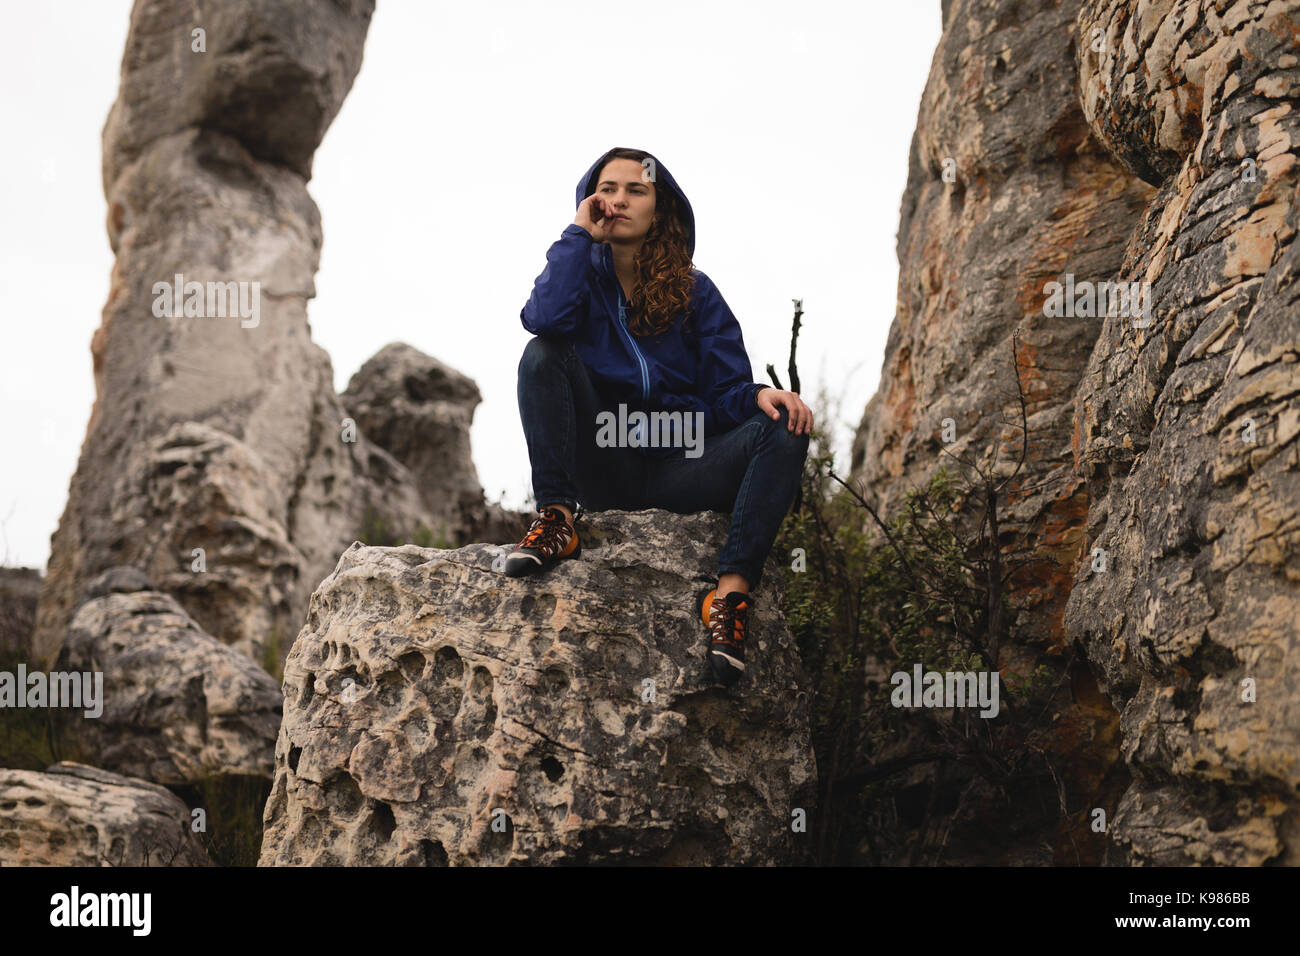 Thoughtful woman sitting on rock pendant l'alpinisme Banque D'Images